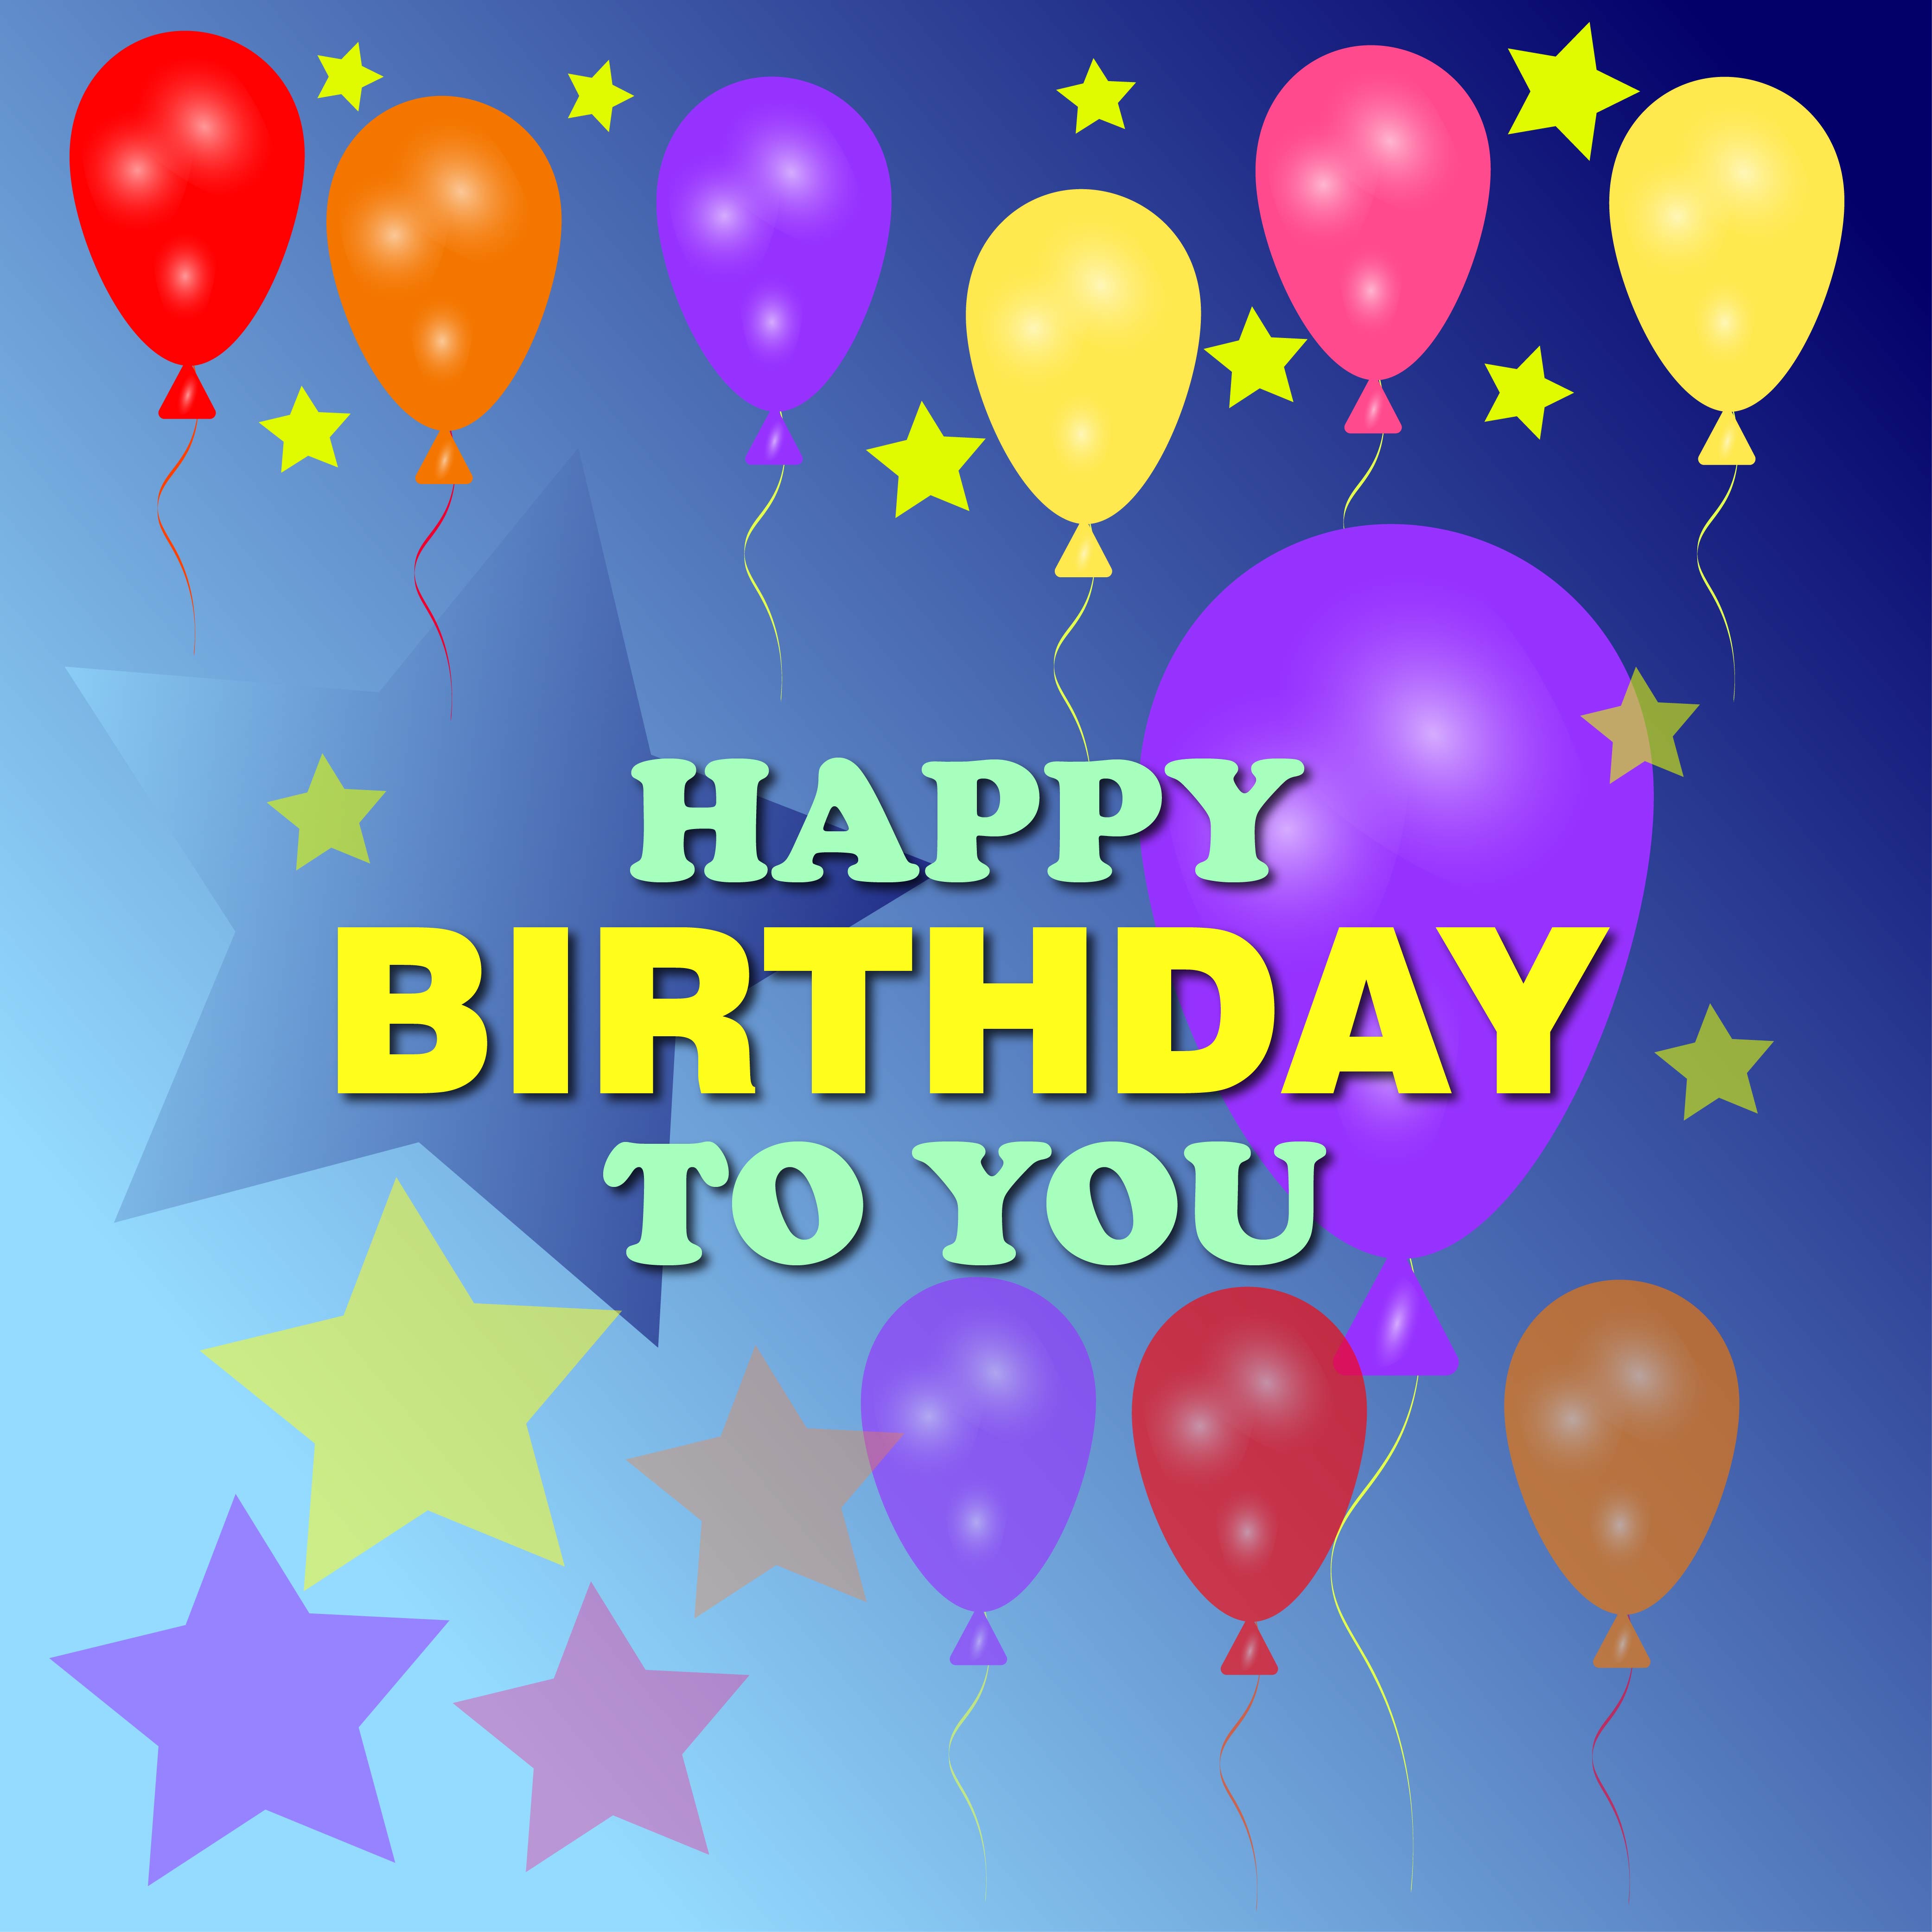 Happy Birthday Card Design with Balloons and Stars AI, PSD and EPS file and high quality JPG image in a zipped folder cover image.